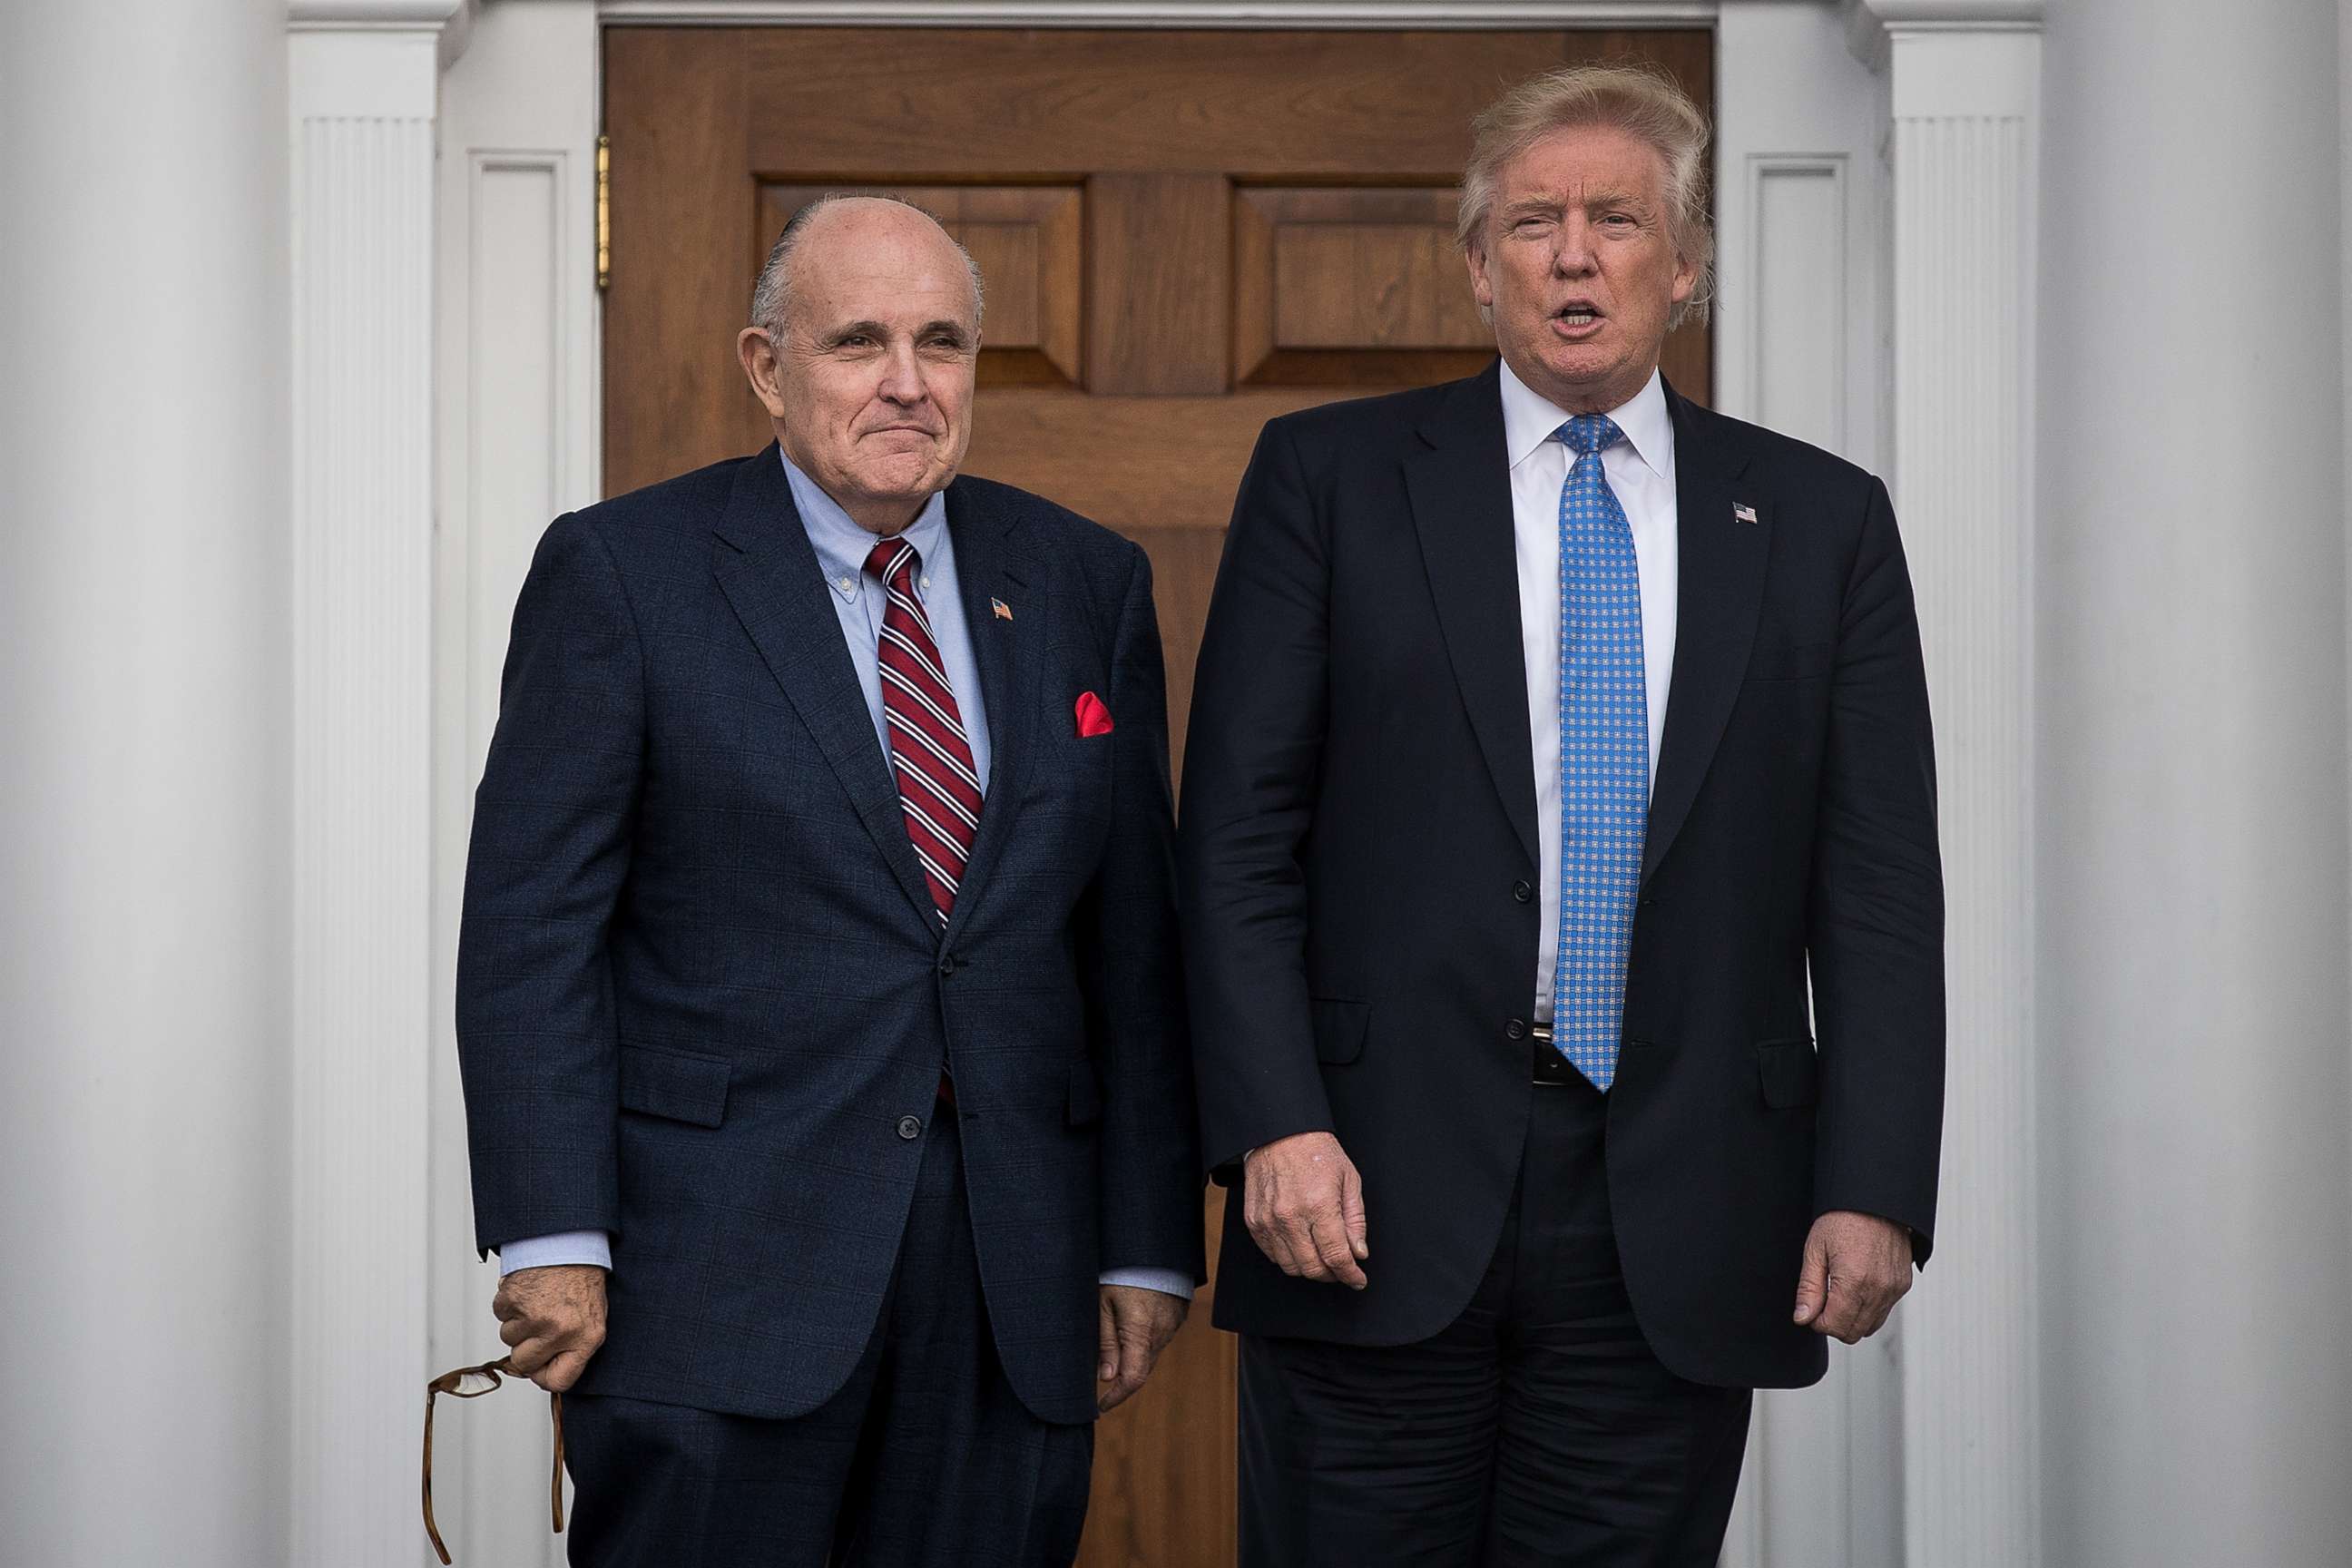 PHOTO: Former New York City mayor Rudy Giuliani, left, stands with president-elect Donald Trump before their meeting at Trump International Golf Club, Nov. 20, 2016 in Bedminster Township, N.J.